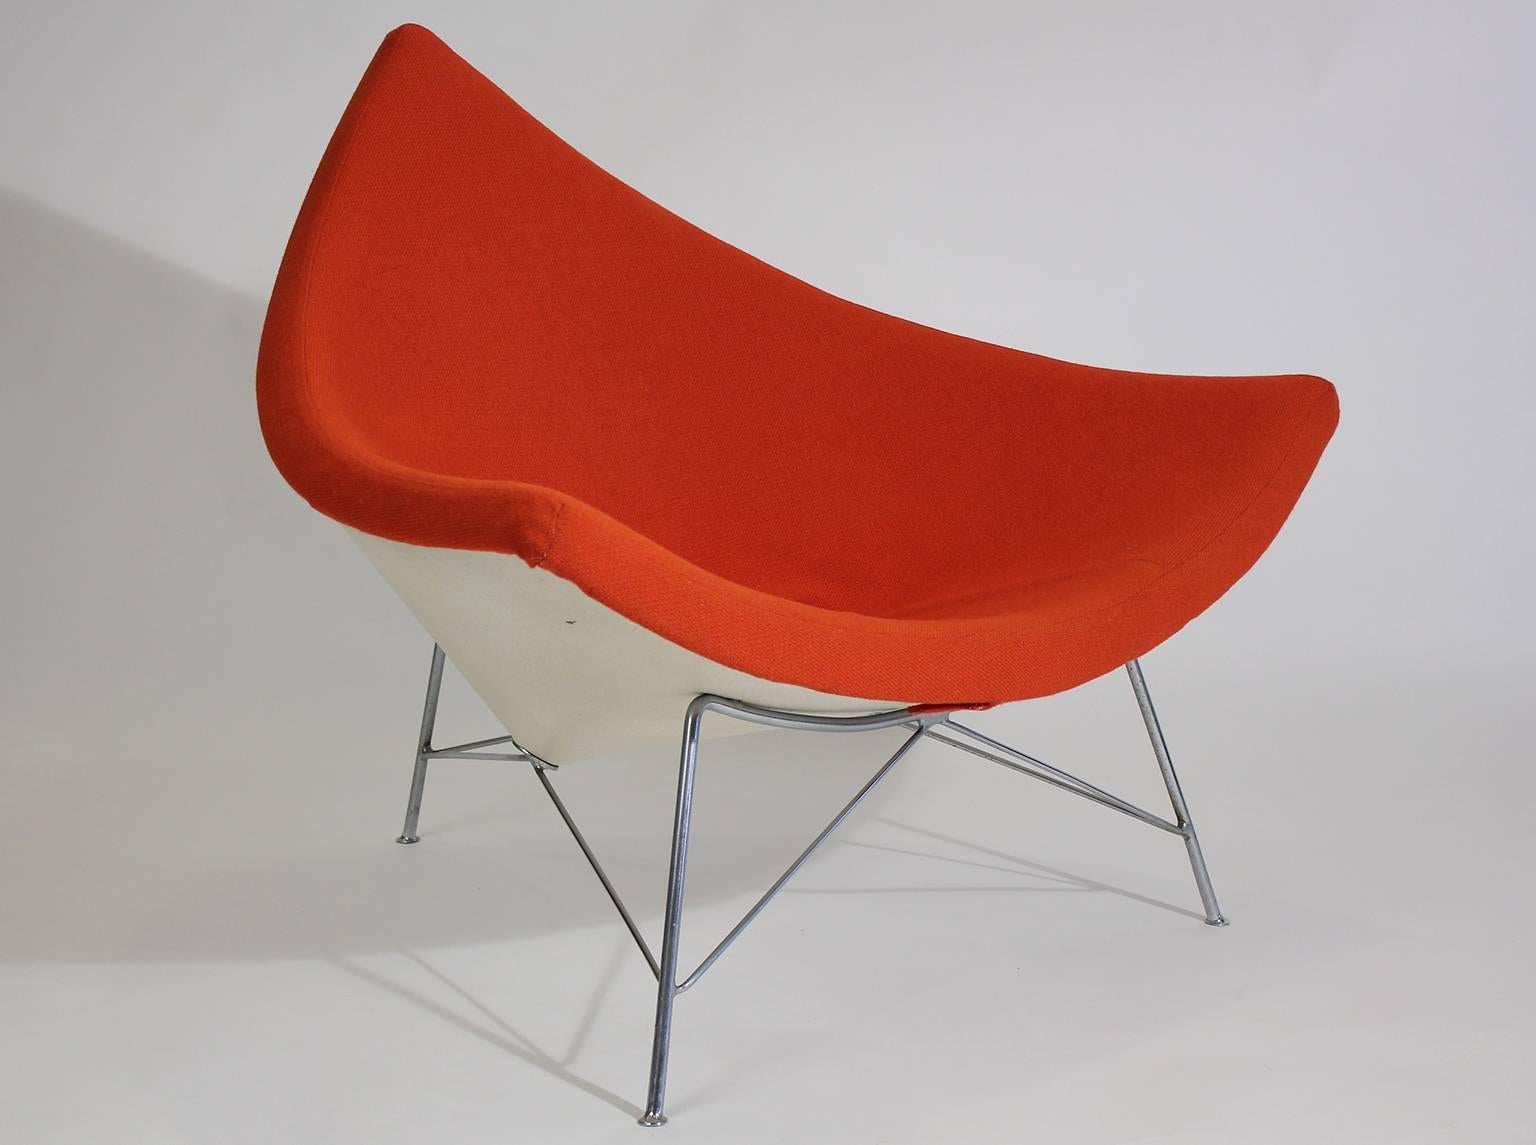 Rare original early version George Nelson coconut chair, circa late 1950s. Pretty sure this is the second version and has a metal shell. Later the chairs shelf were made in fiberglass. This chair was reupholstered in Knoll fabric several years ago